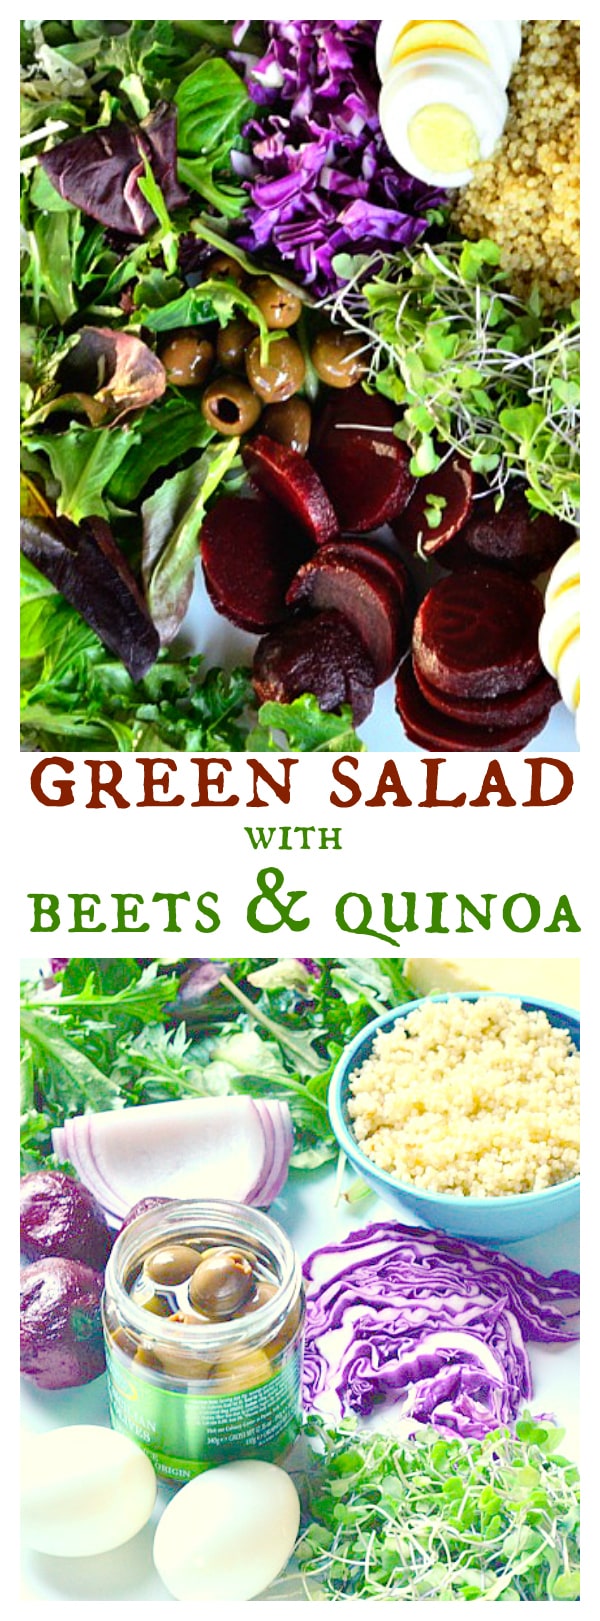 Green Salad with Beets and Quinoa is delicious served as a side or a main dish recipe!